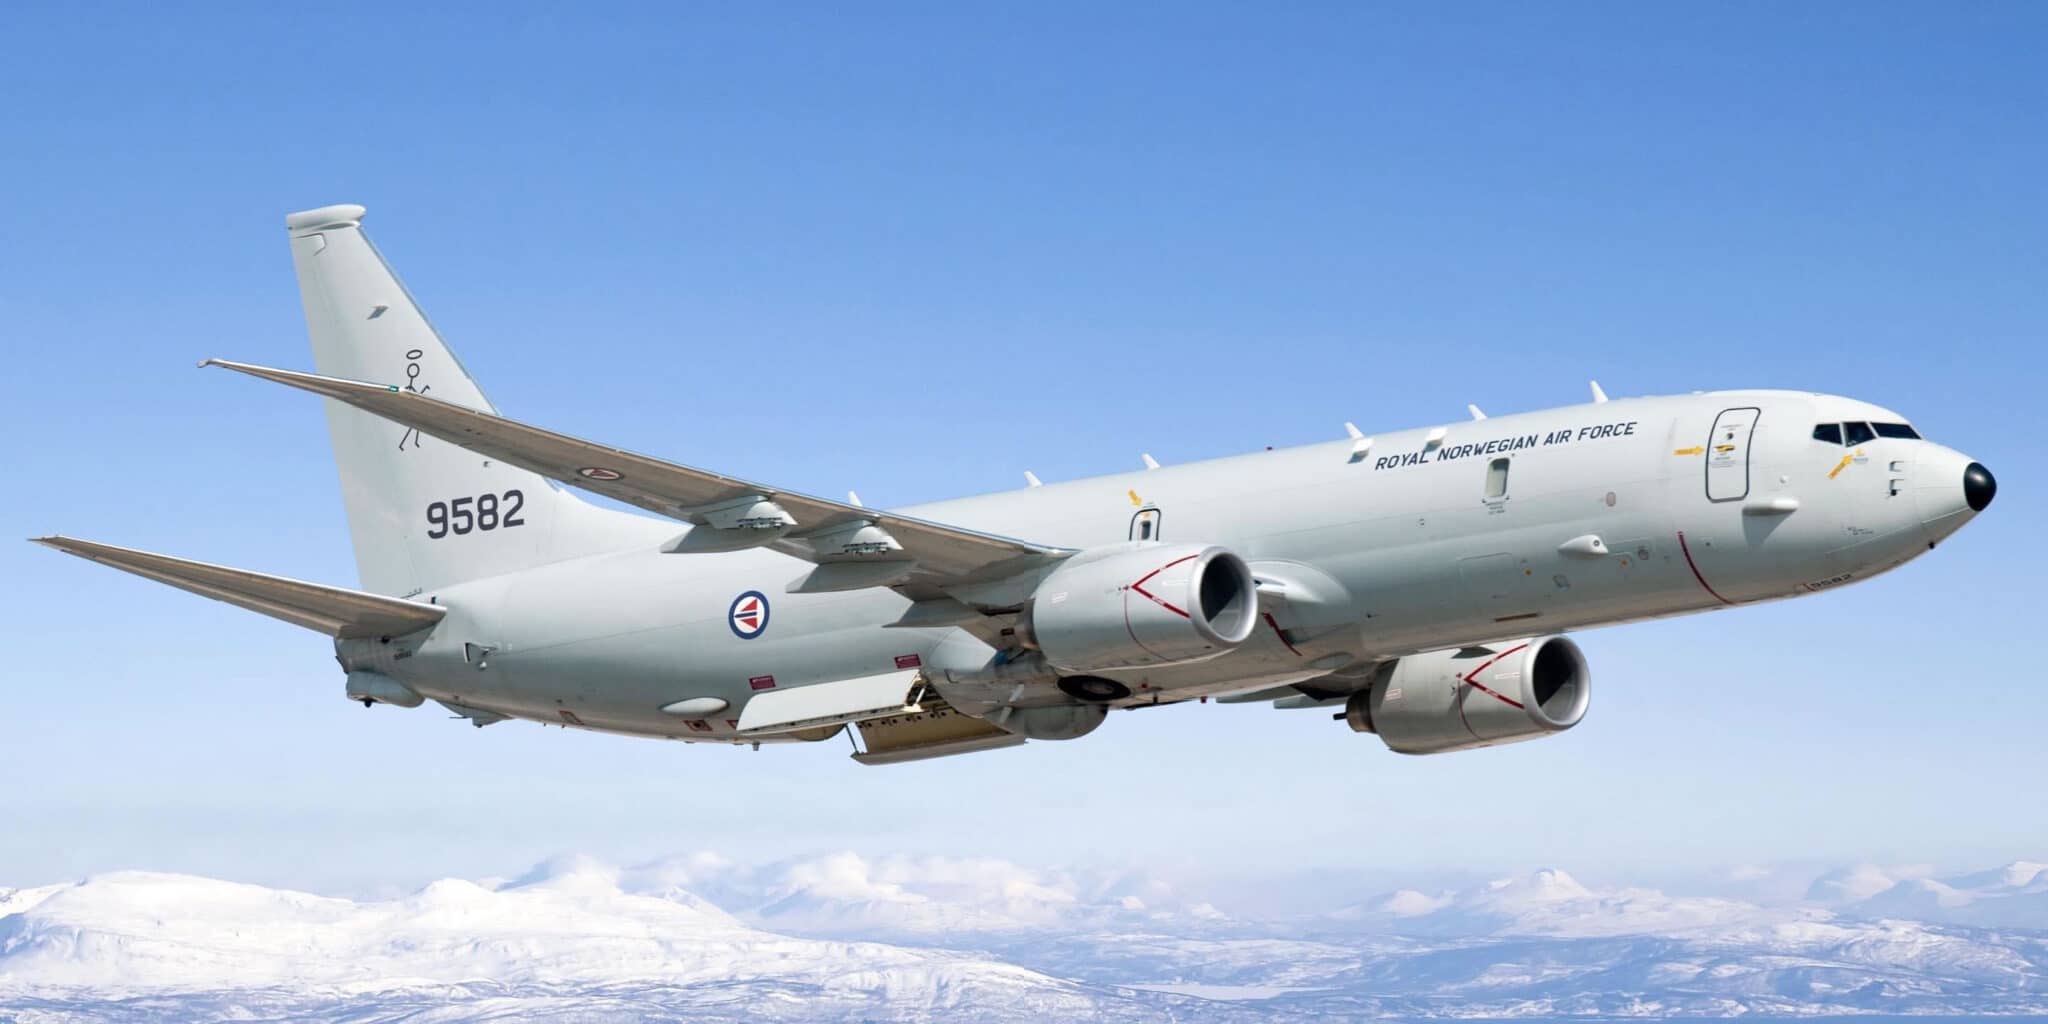 P-8A Poseidon Archives - Page 3 of 7 - Naval News